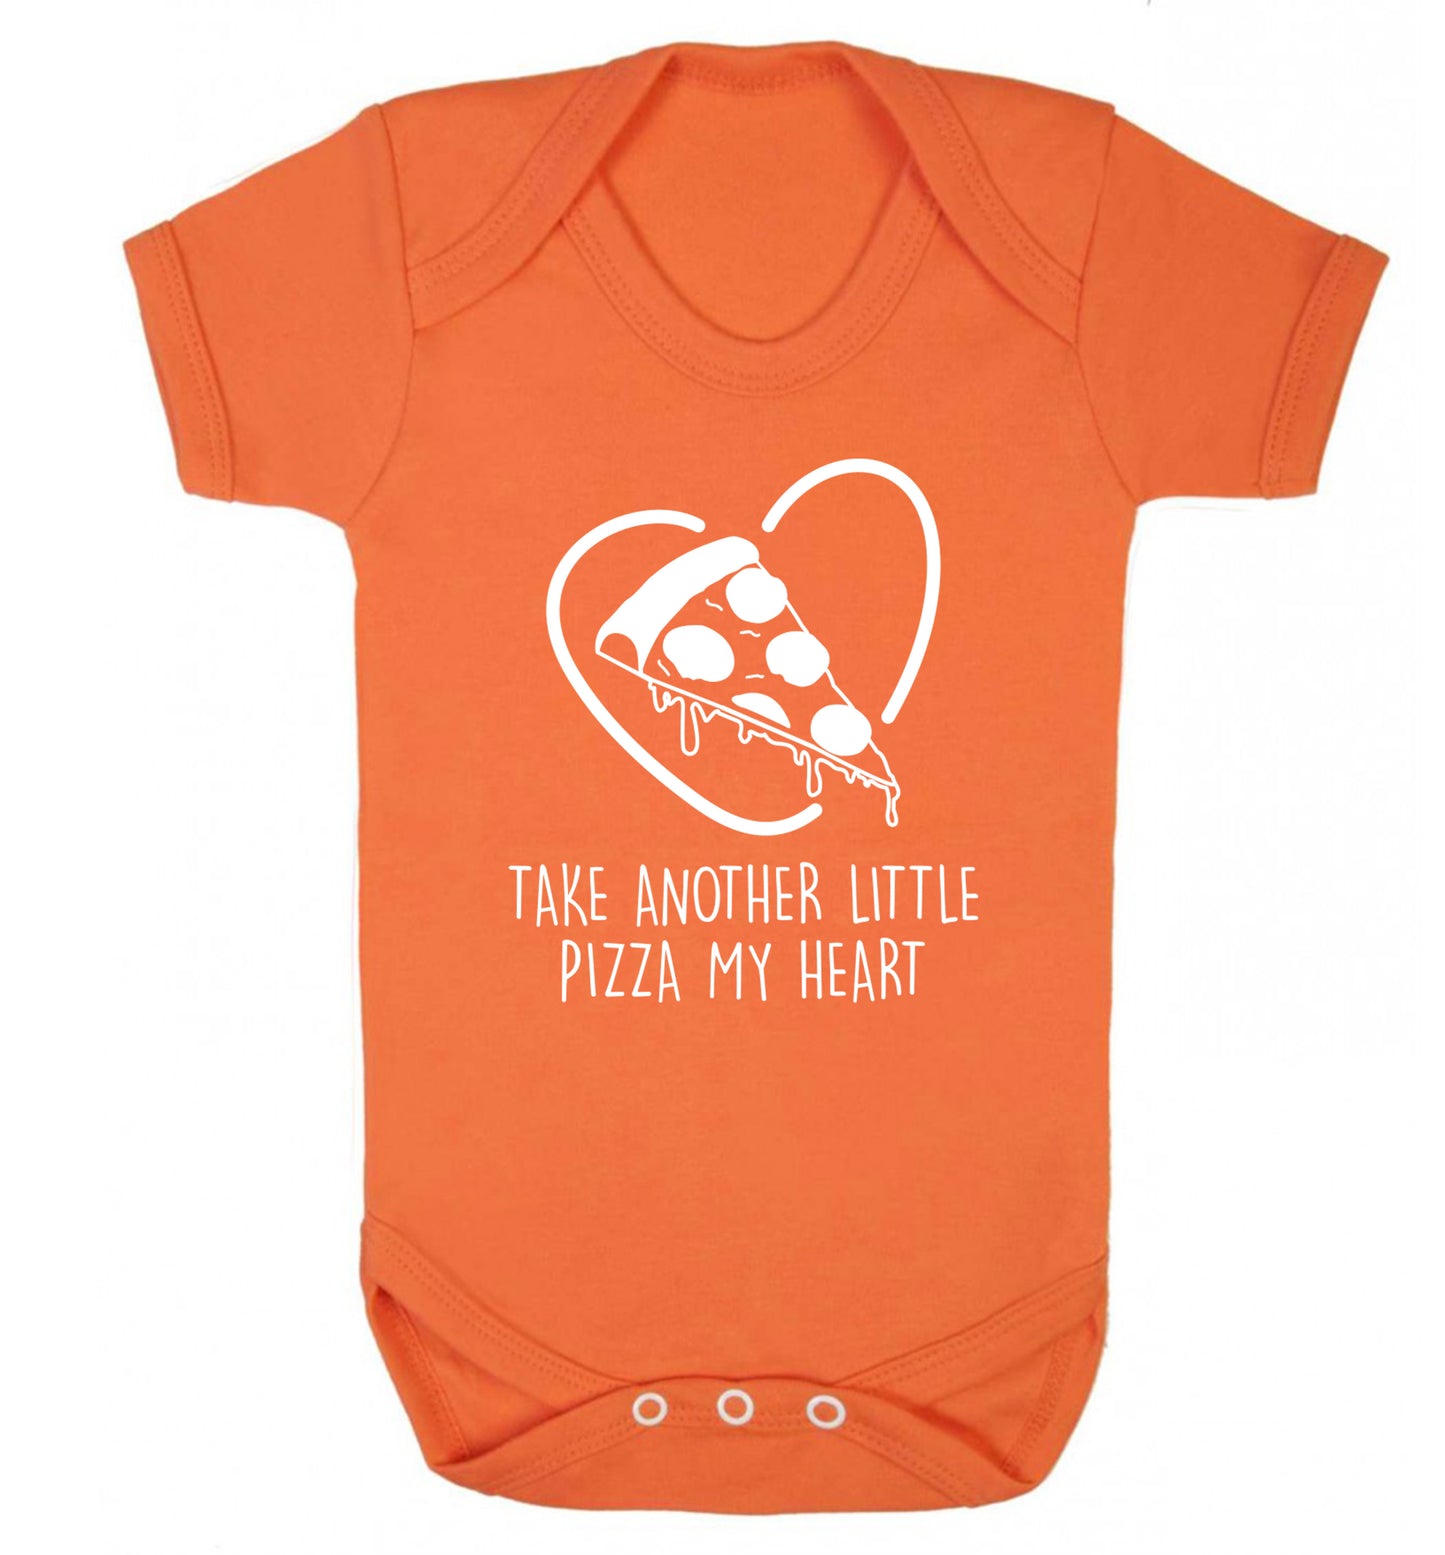 Take another little pizza my heart Baby Vest orange 18-24 months